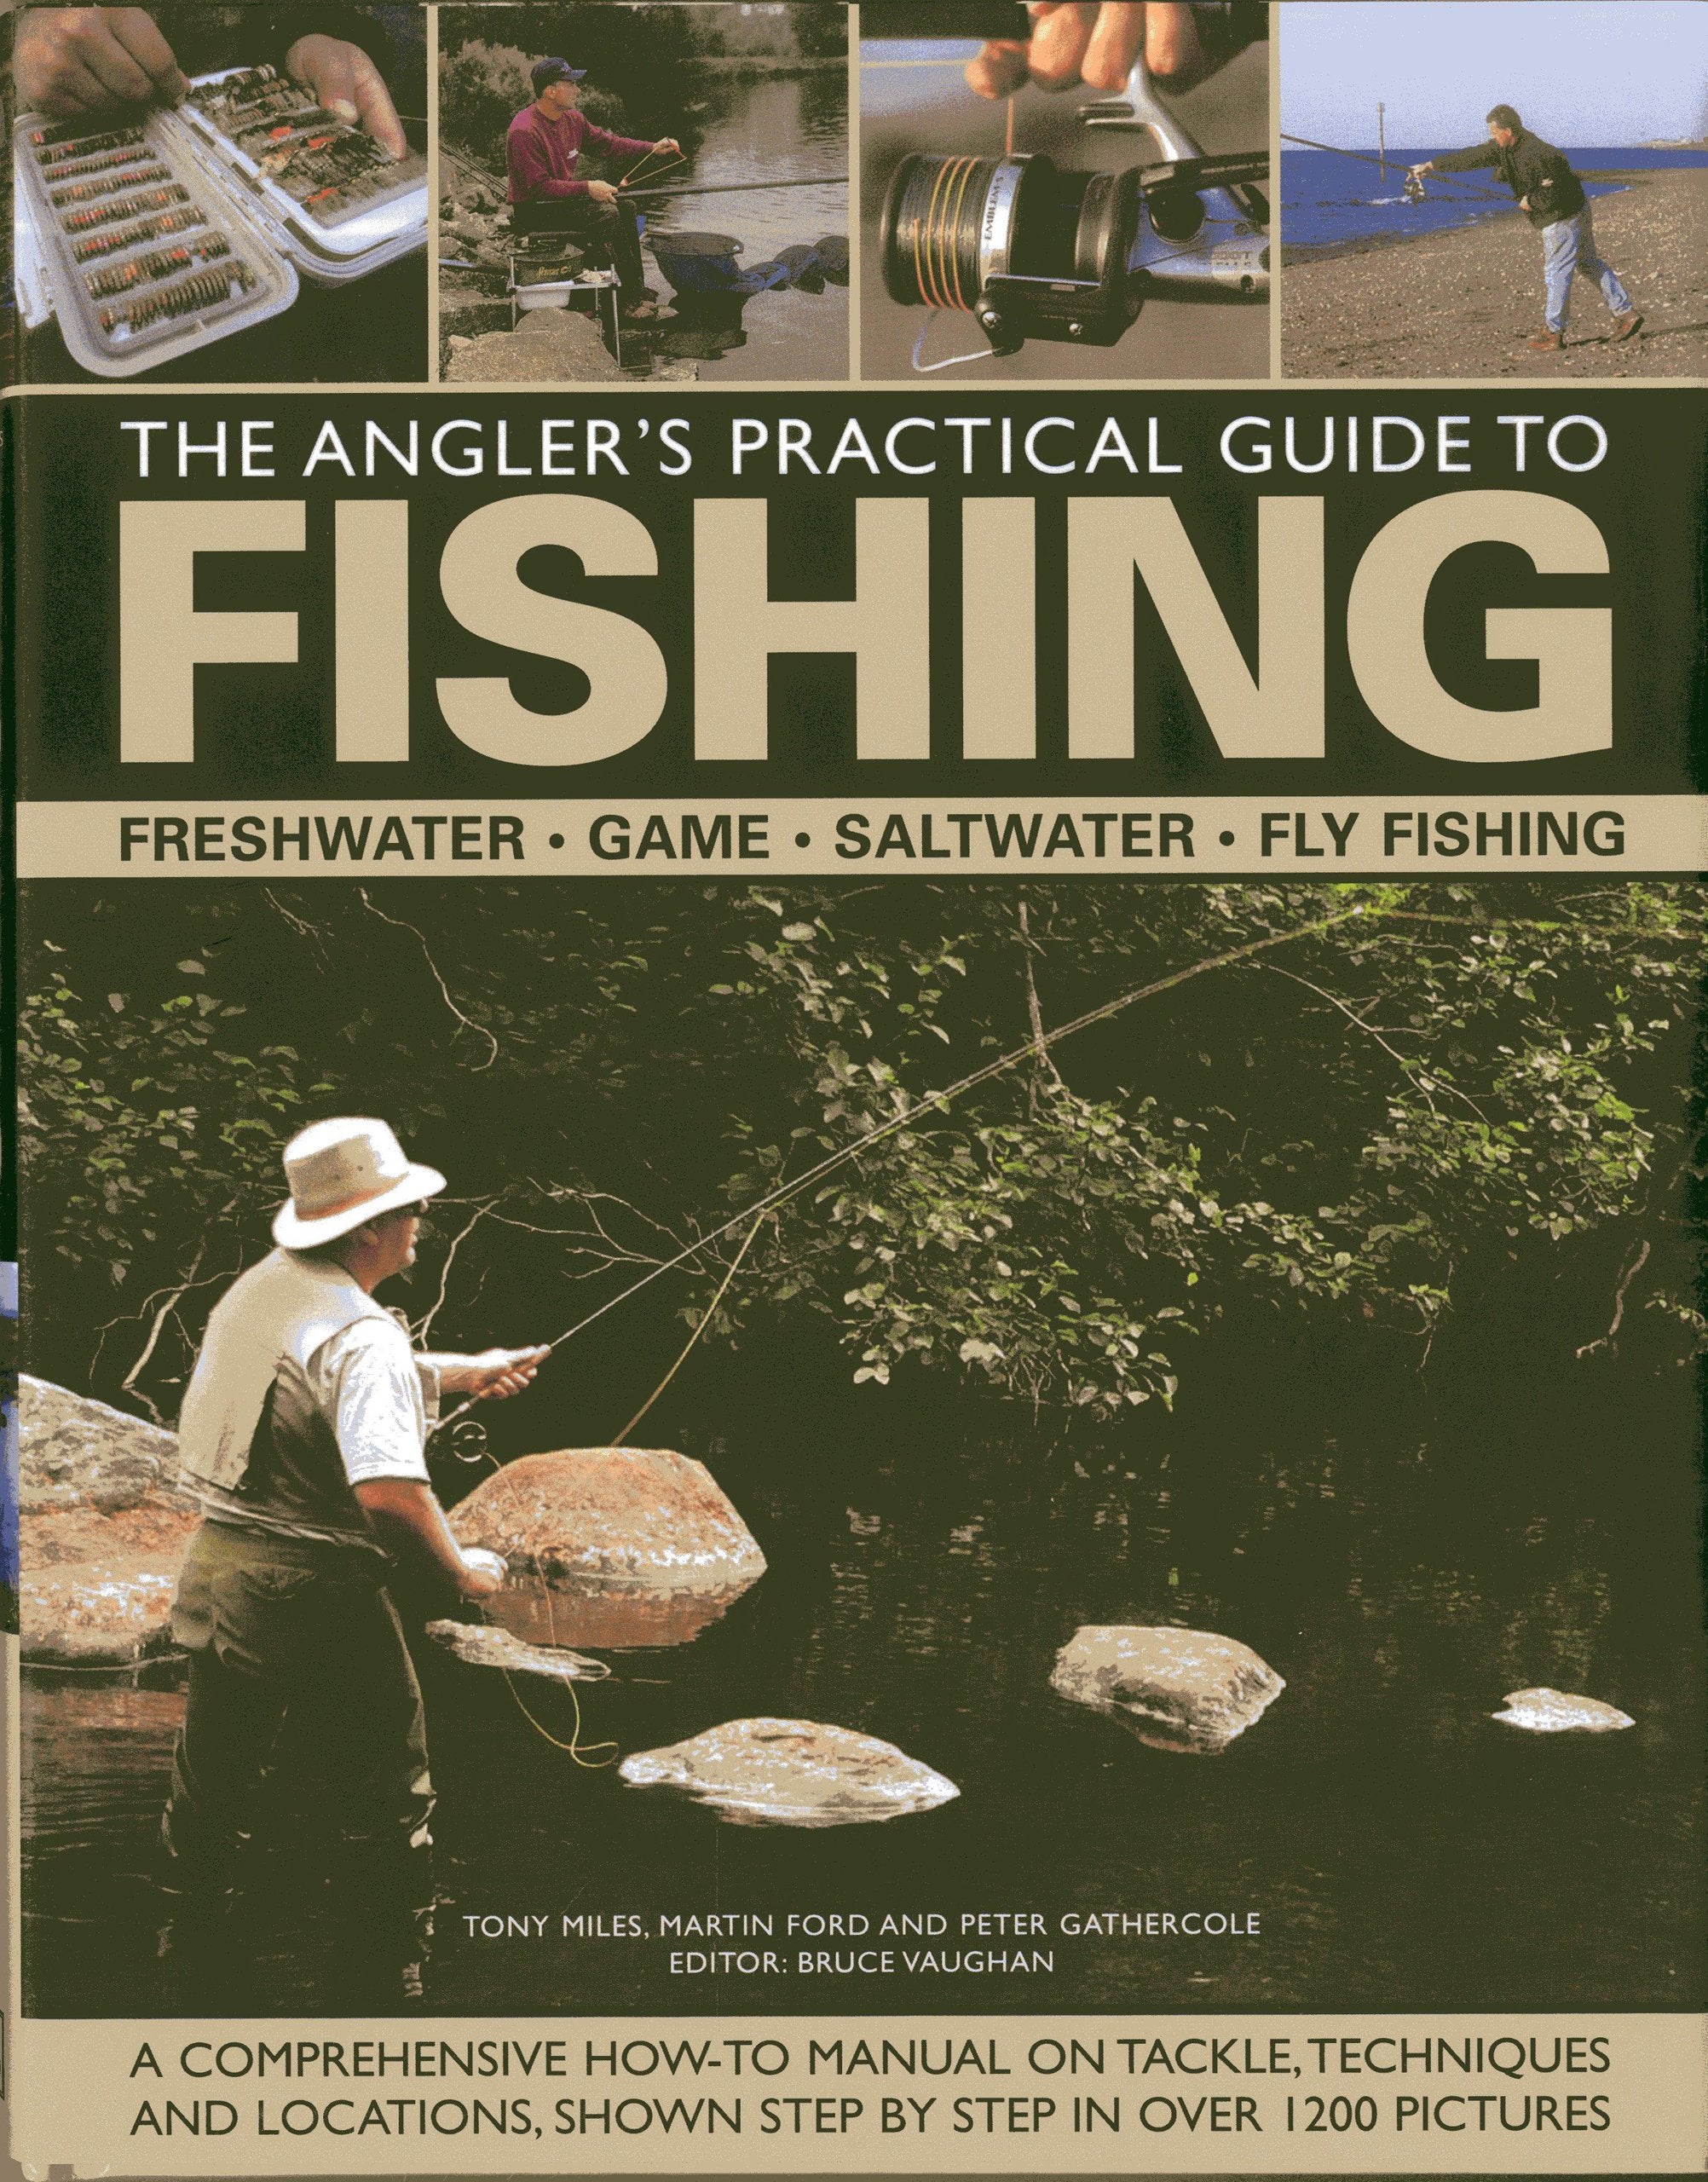 The Angler's Practical Guide to Fishing: A comprehensive how-to